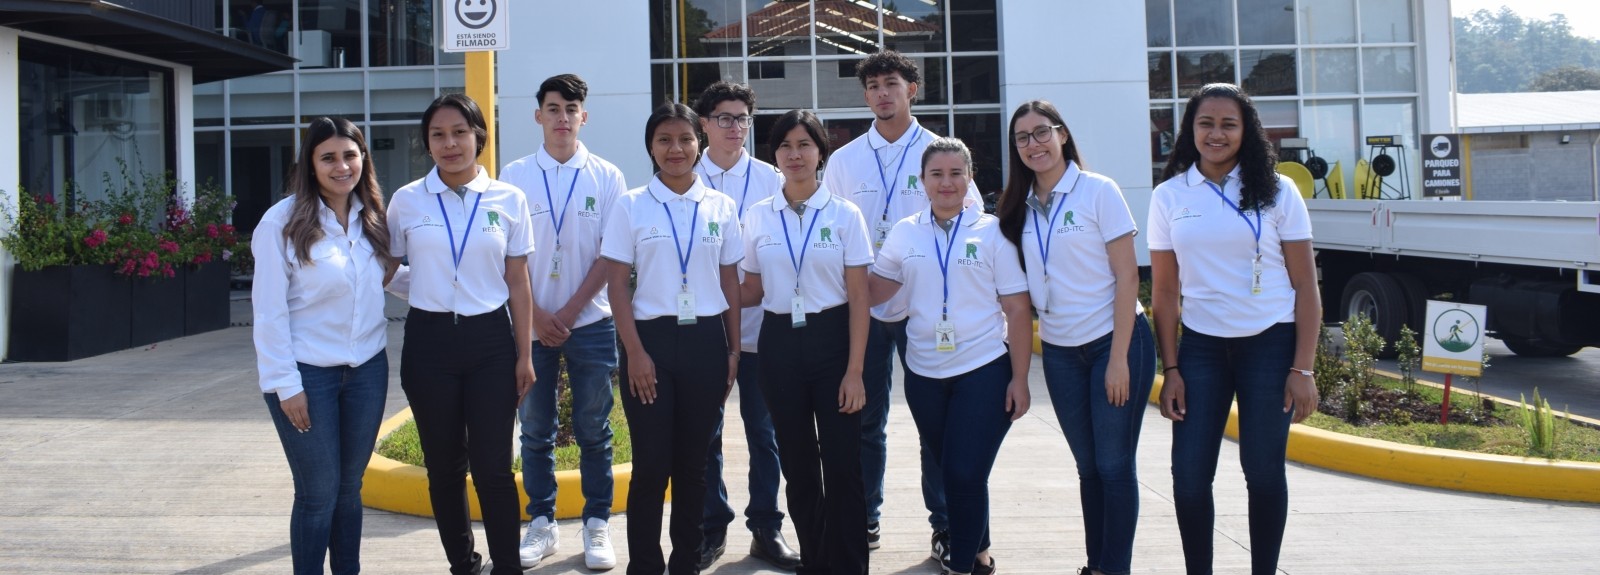 Lutheran World Relief supports young people in Honduras with access to employment and mental health support.  